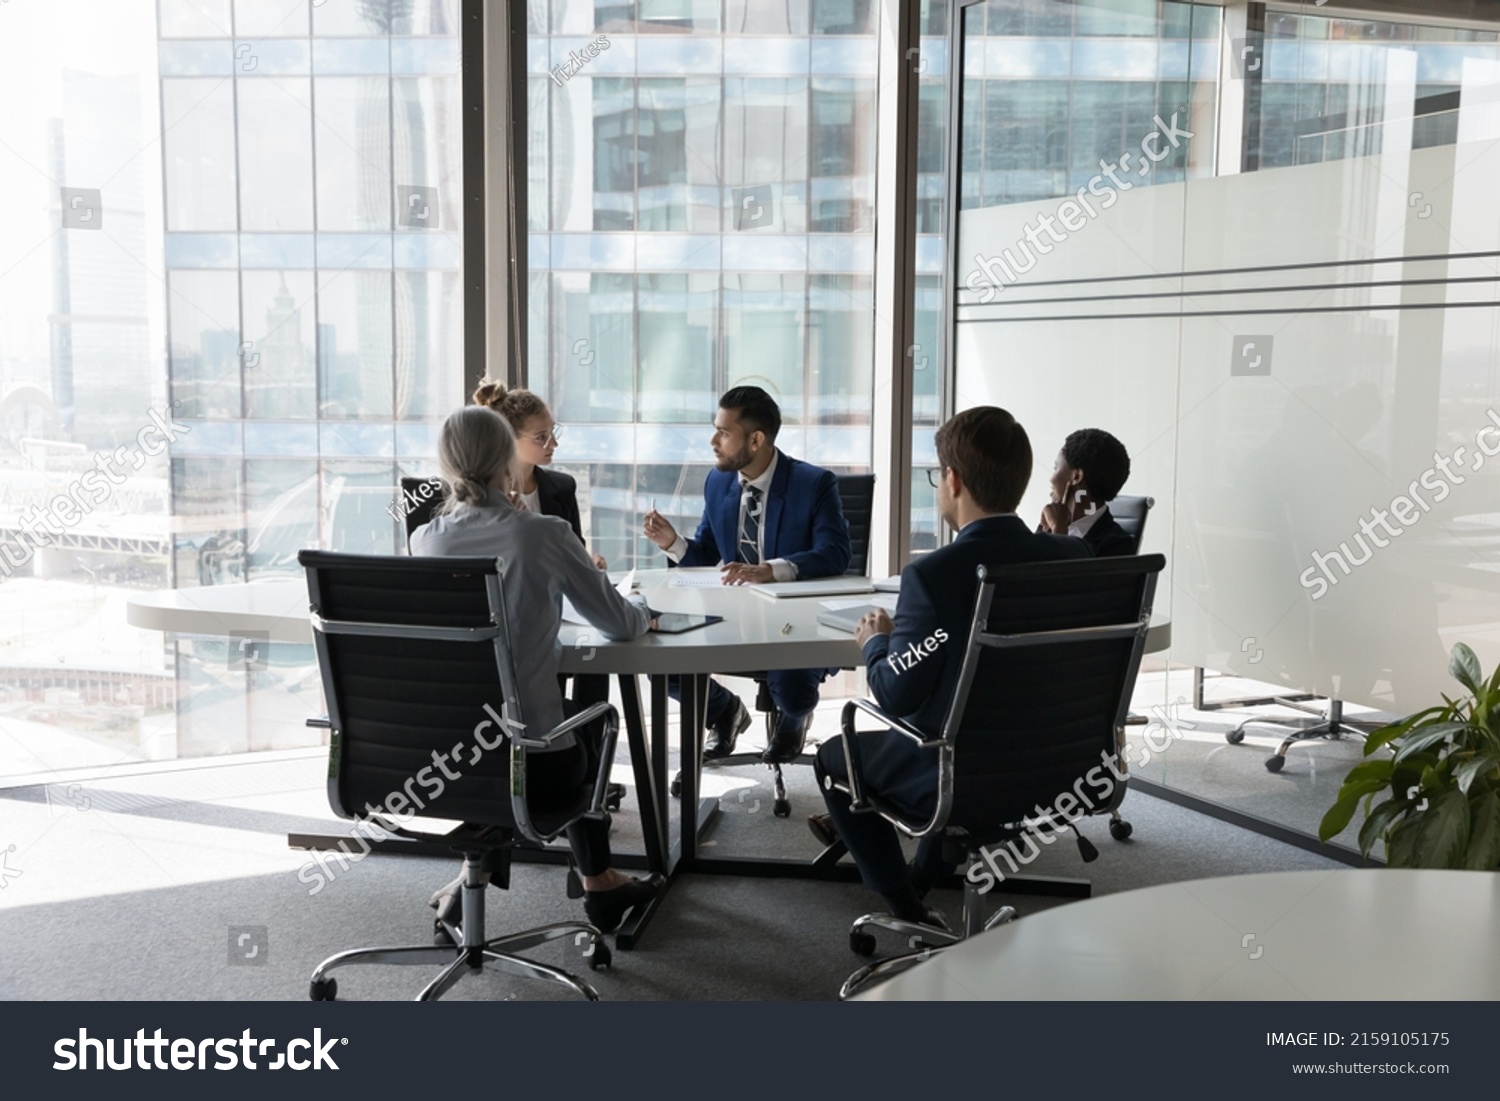 Serious team of professionals, five multi ethnic business people negotiating in modern boardroom, discuss project, consider contract terms and conditions, solve business. Formal meeting event concept #2159105175